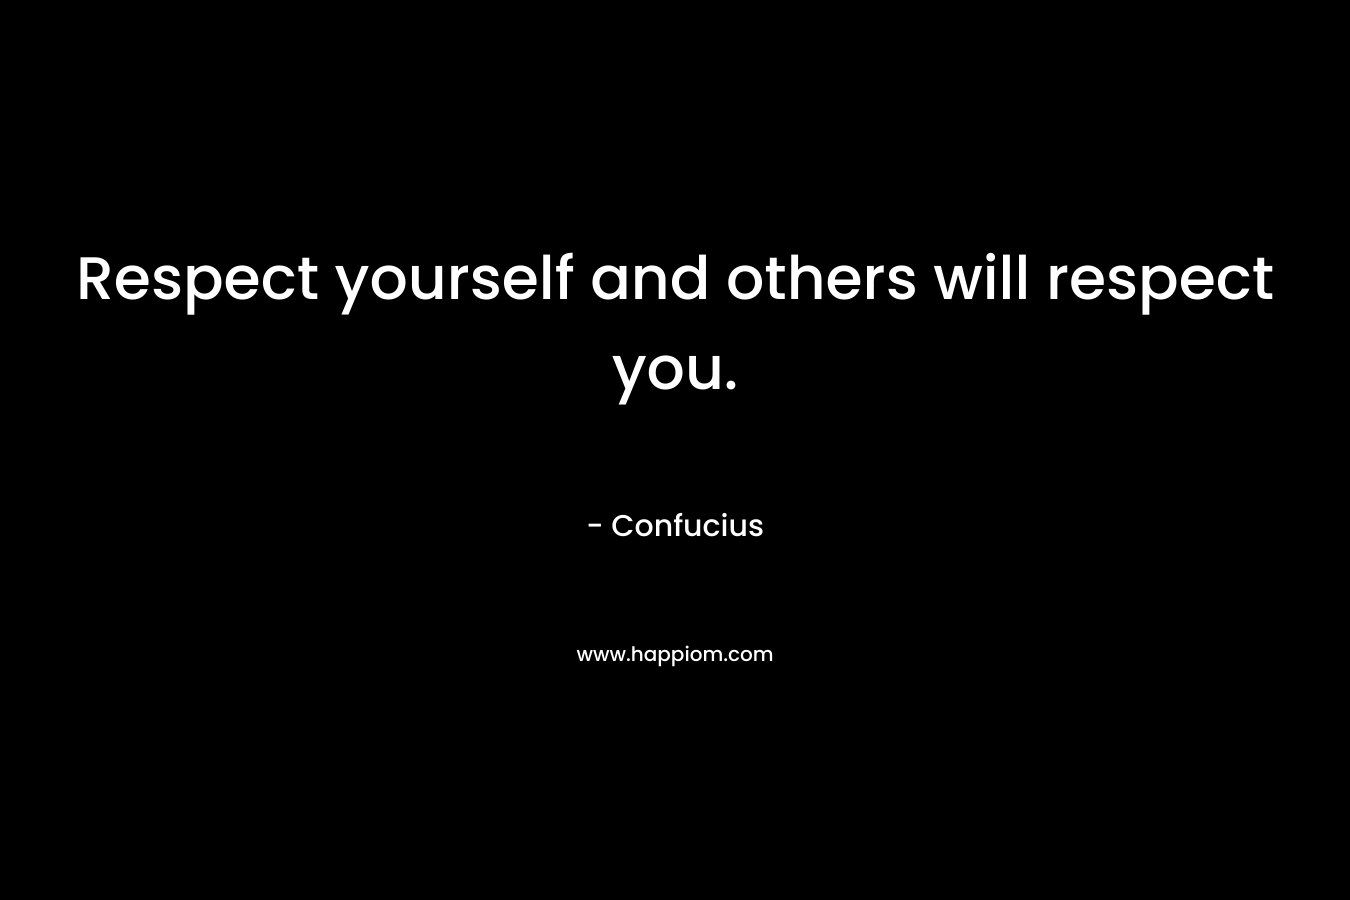 Respect yourself and others will respect you. – Confucius